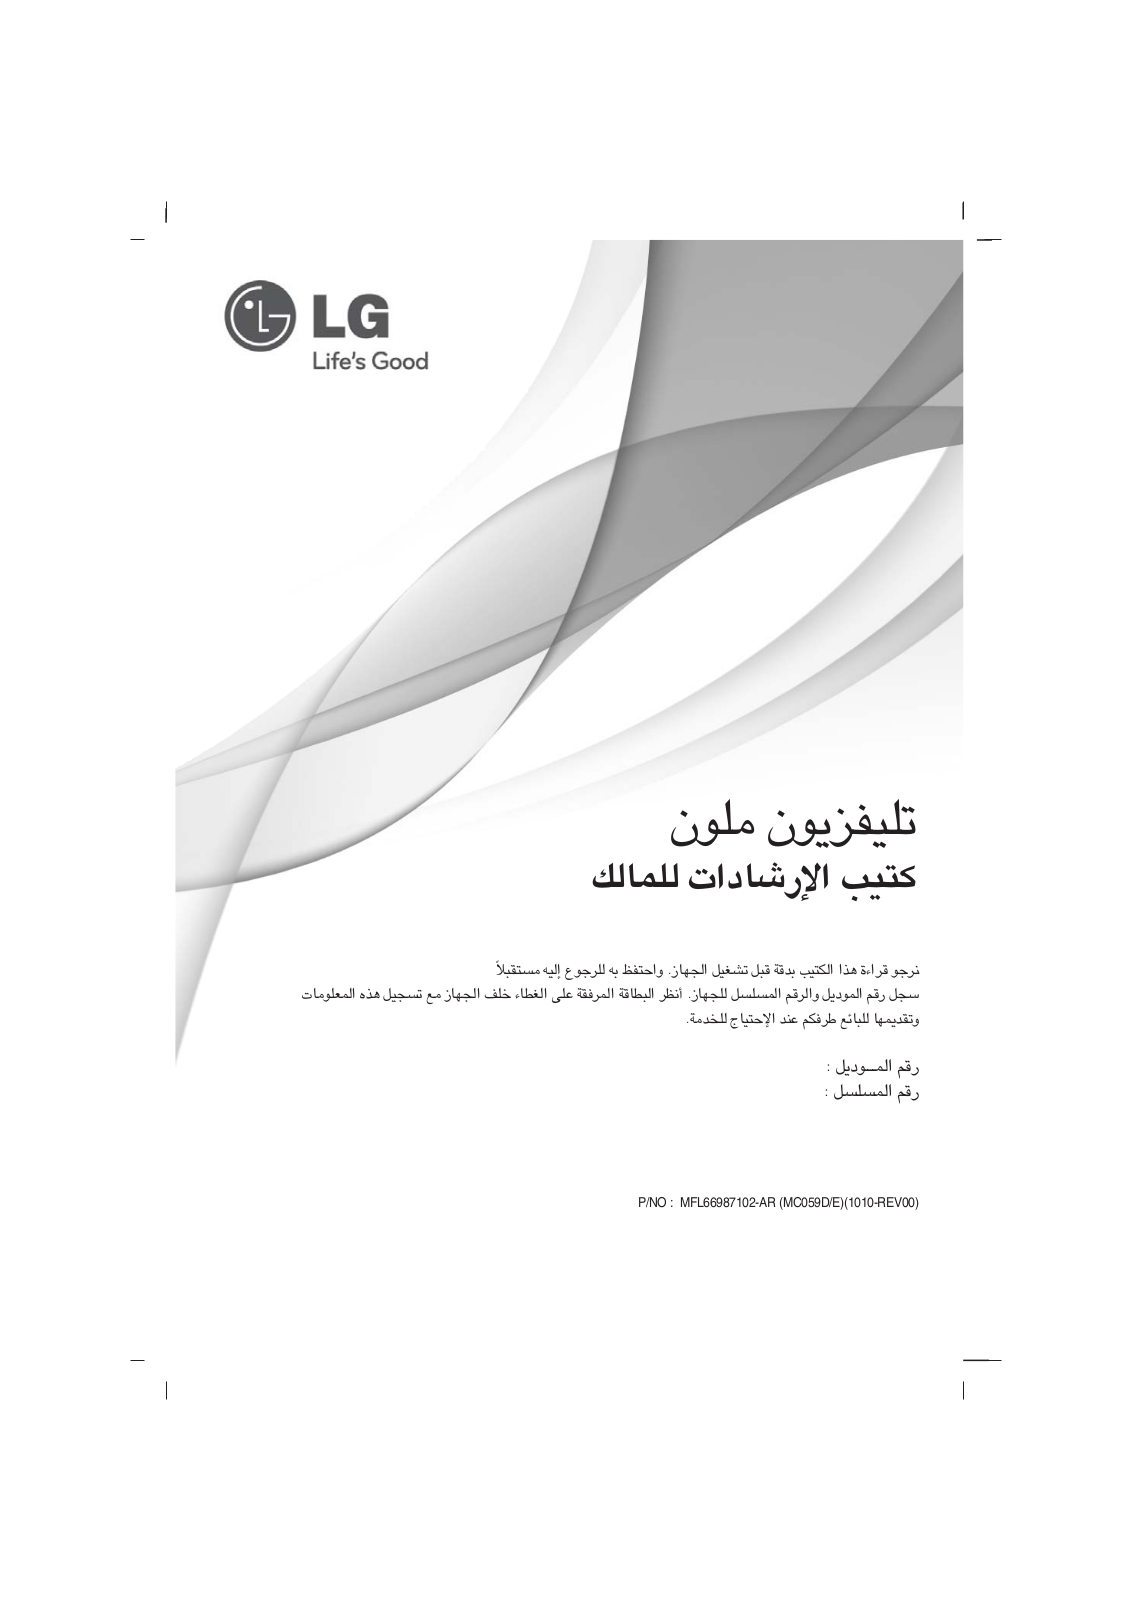 LG 14CC4RB-T2 Owner’s Manual